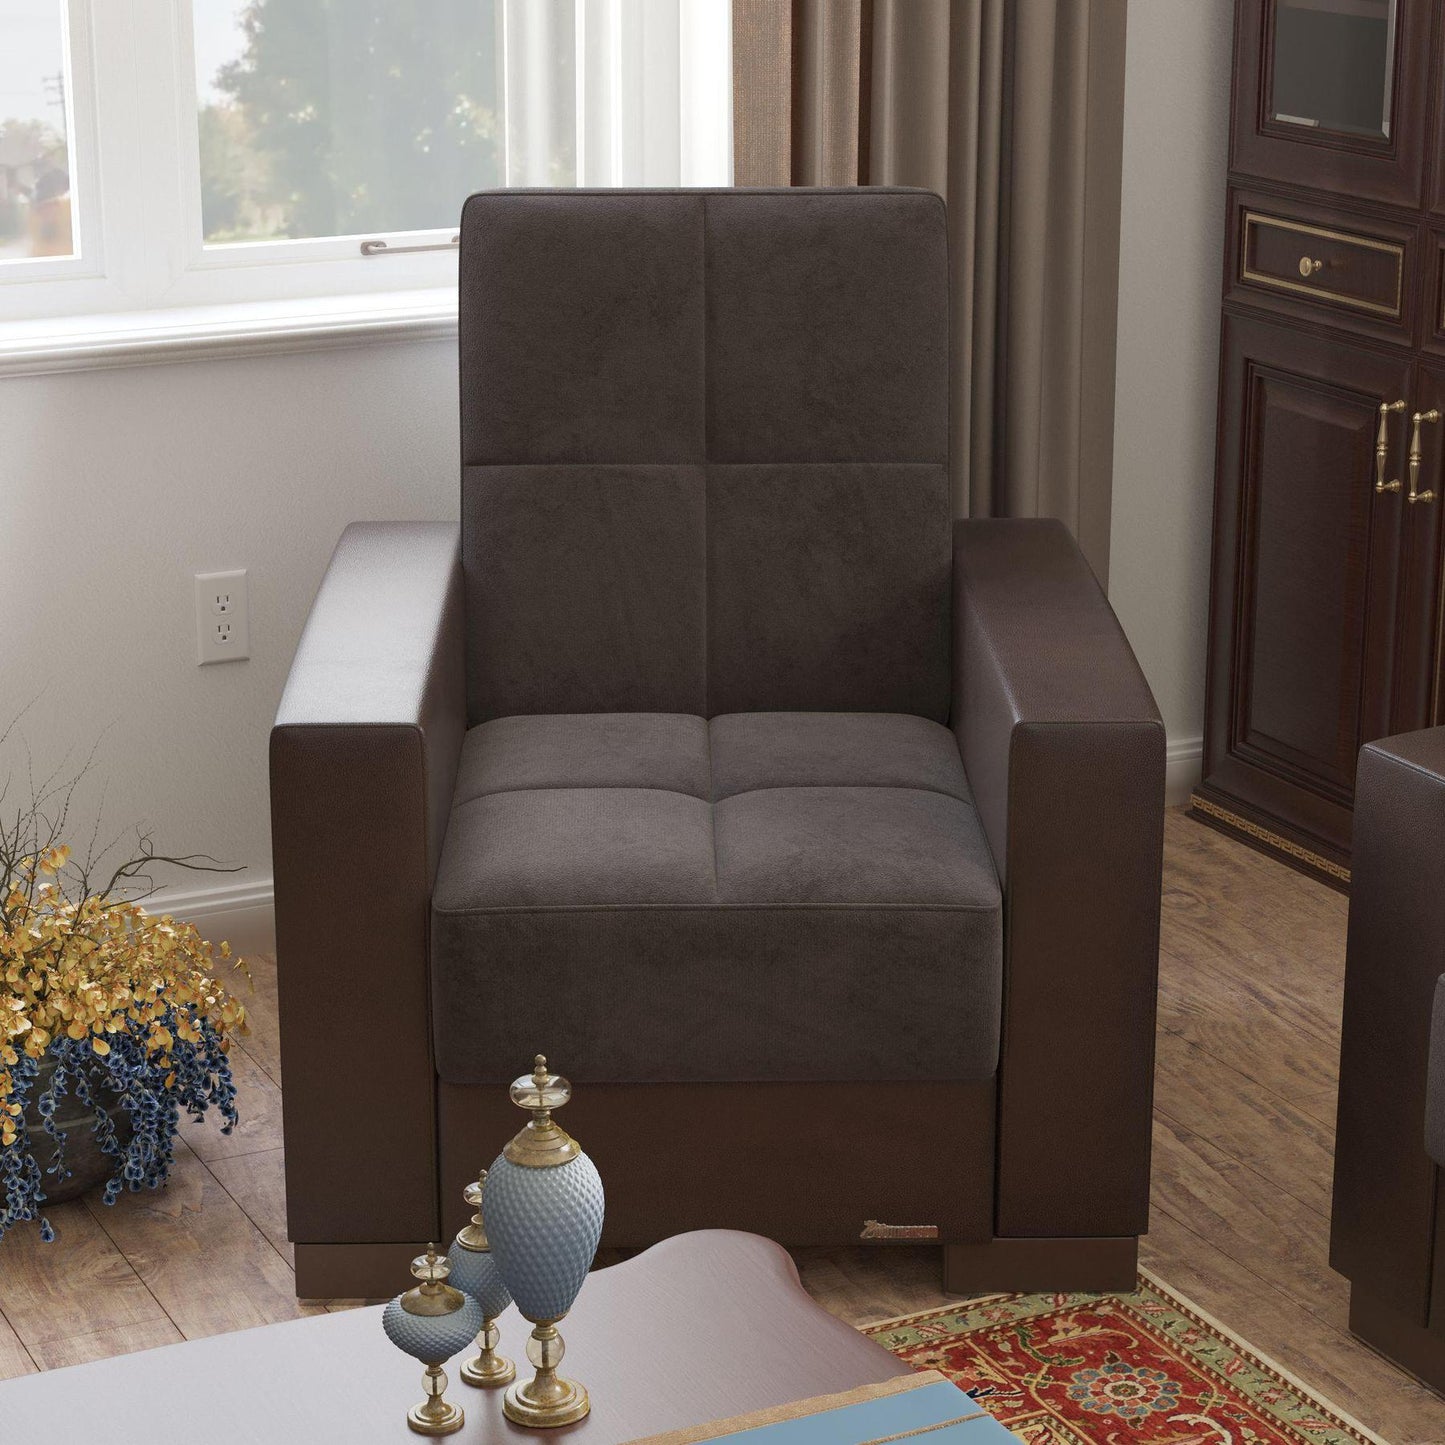 Modern design, Friar Brown, Dark Brown , Microfiber, Artificial Leather upholstered convertible Armchair with underseat storage from Voyage Track by Ottomanson in living room lifestyle setting by itself. This Armchair measures 38 inches width by 36 inches depth by 41 inches height.